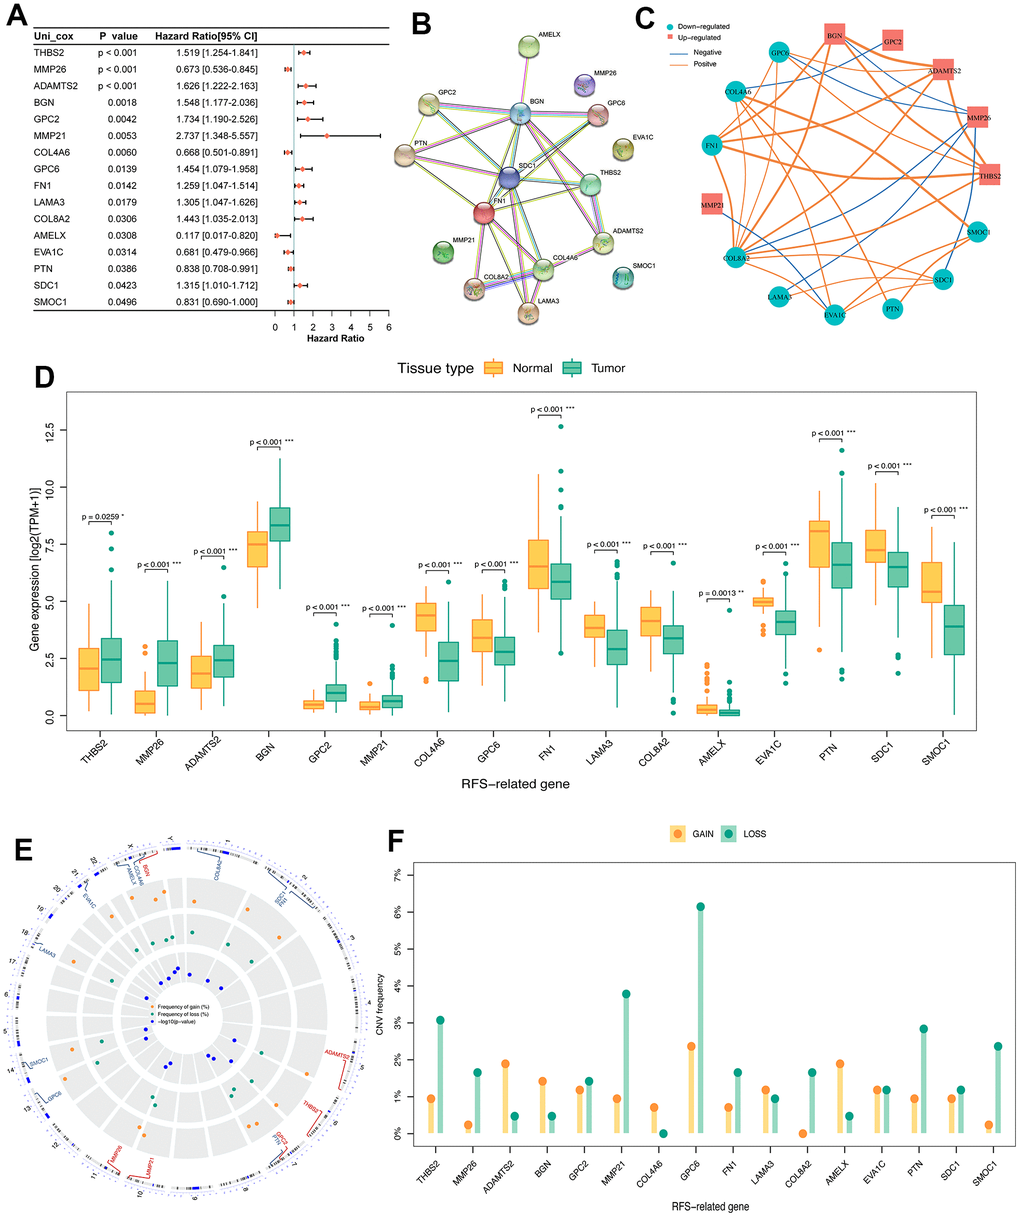 Identification of prognosis related DE-BMGs in PCa. (A) Forest map of 16 RFS related DE-BMGs in TCGA-PRAD dataset. (B) PPI network of 16 RFS related DE-BMGs. (C) Co-expression network of 16 RFS related DE-BMGs. (D) Expression of 16 RFS related DE-BMGs in PCa and normal tissues. (E, F) Chromosome location and CNV alteration frequency of 16 RFS related DE-BMGs. Copy number amplification, yellow dot; Copy number deletion, green dot. RFS: Recurrence free survival. *p p p 